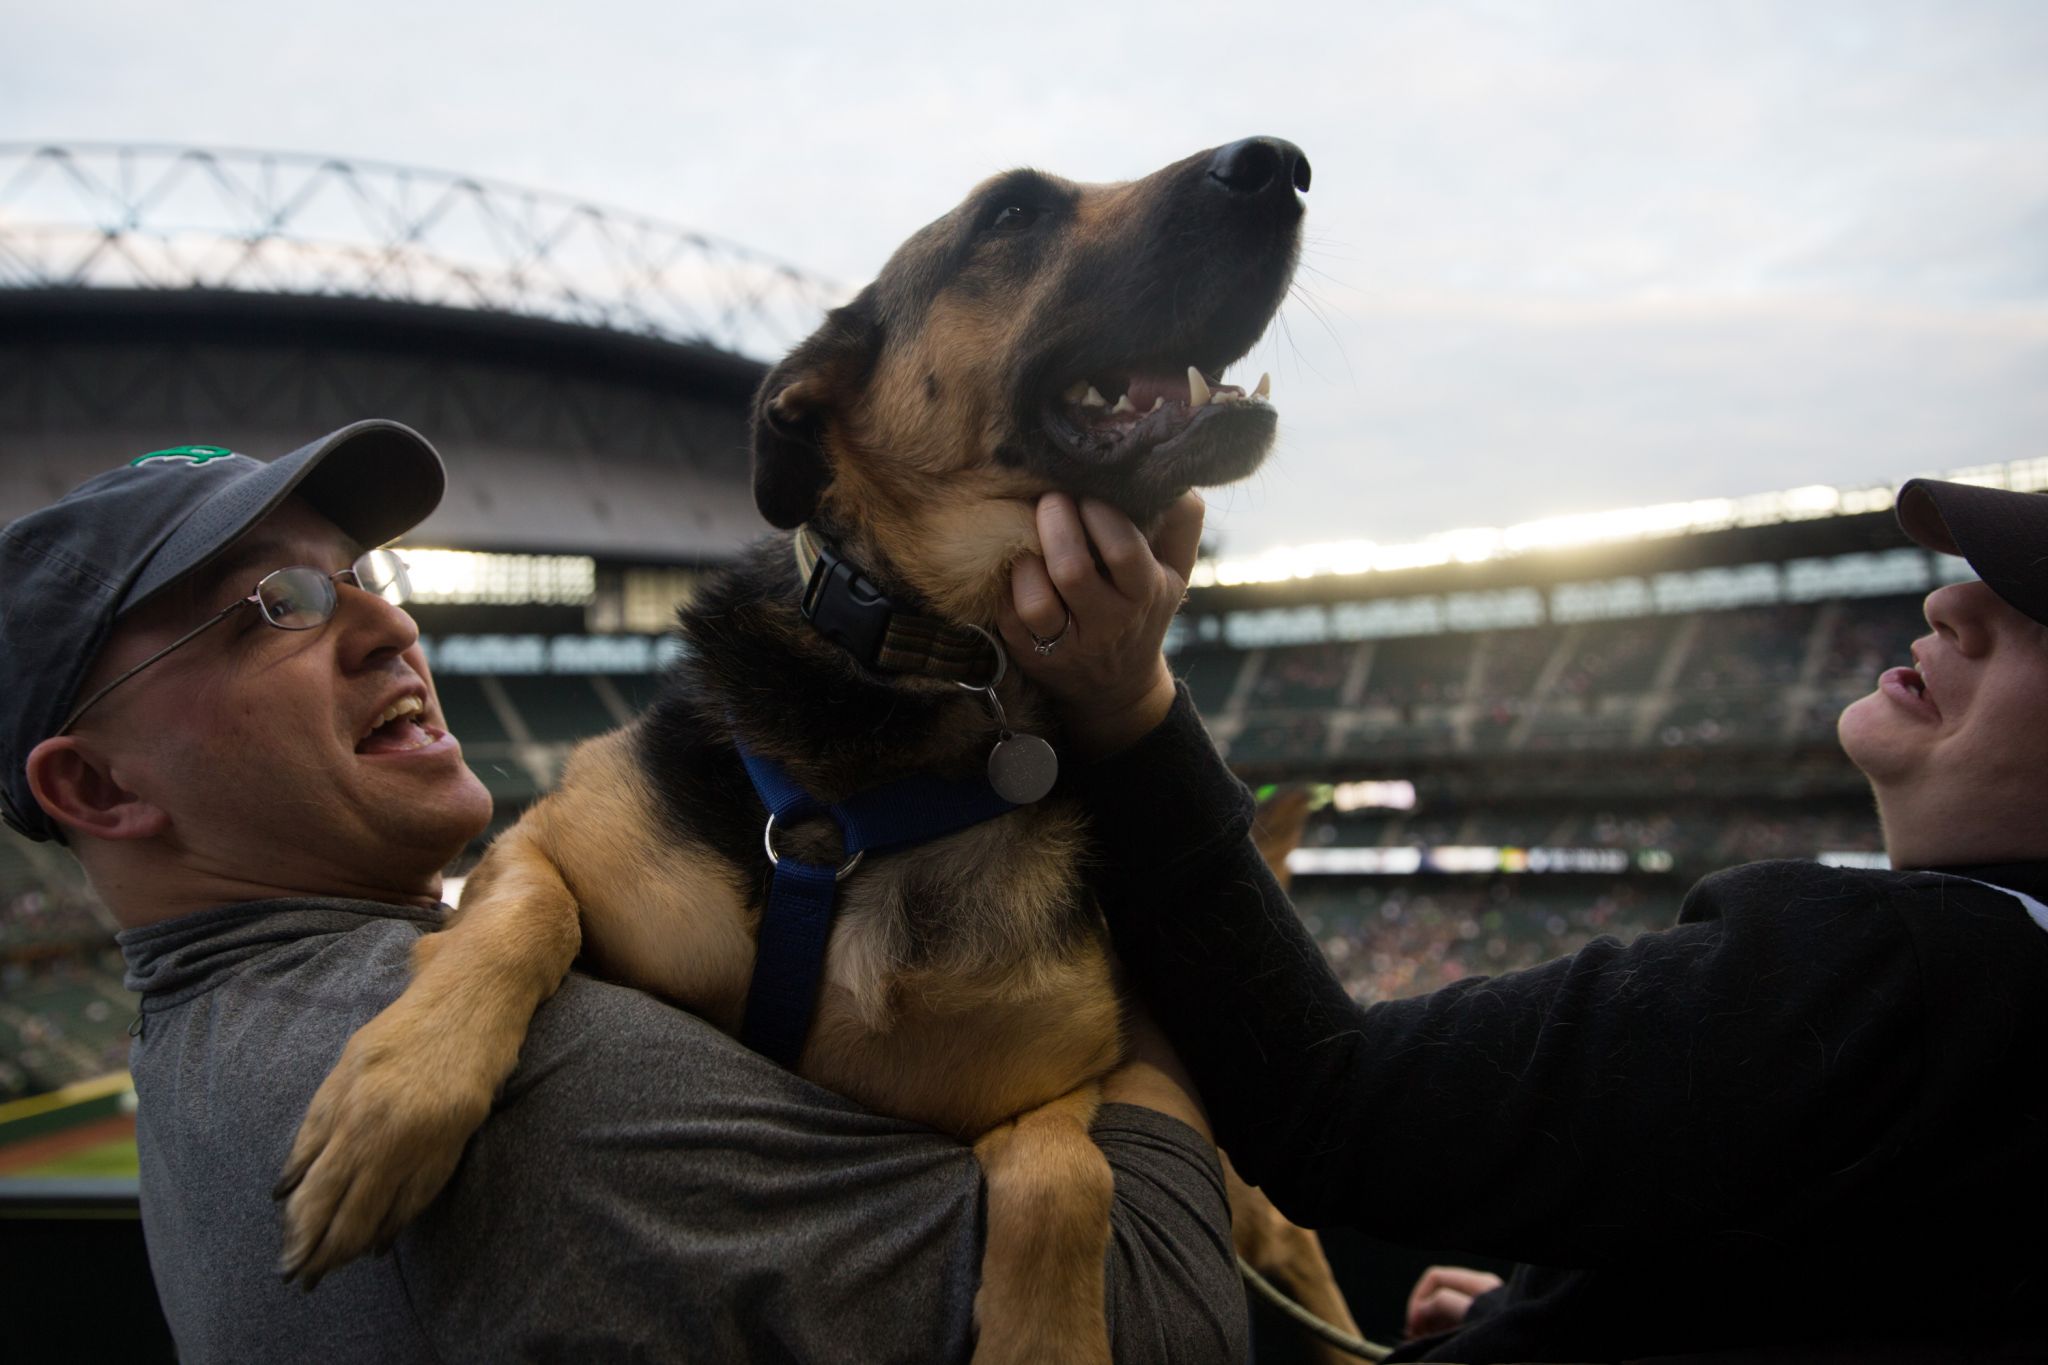 Who Let The Dogs In (To Safeco Field)? Mariners Host Bark in the Park